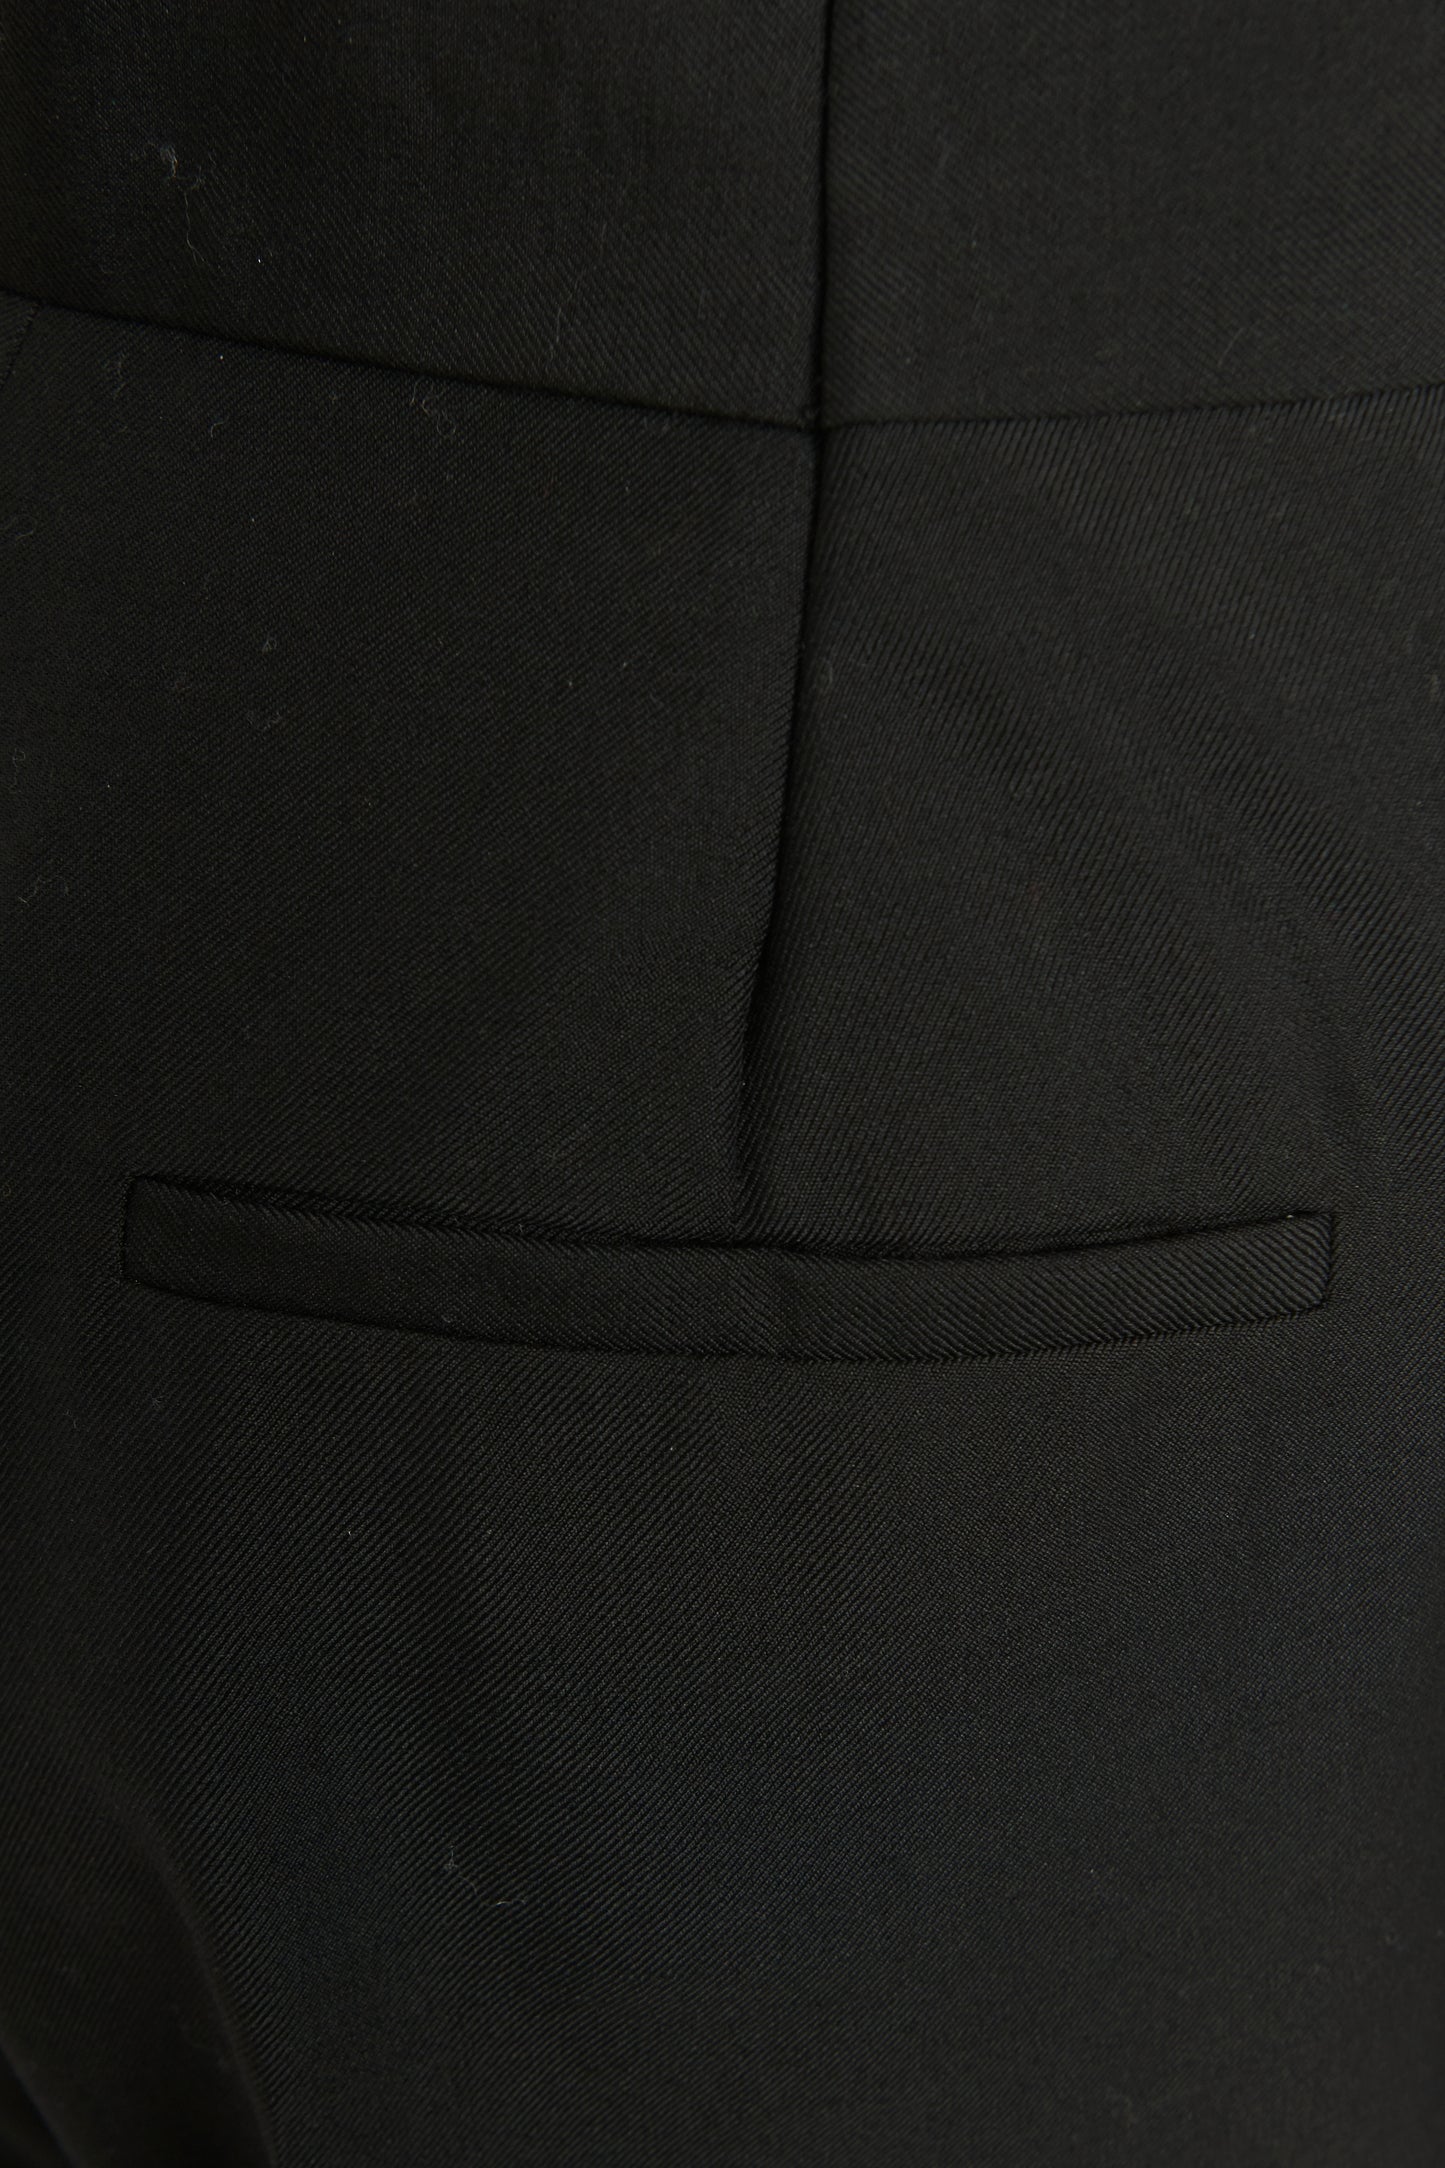 Black Wool Preowned Wide Leg Trousers